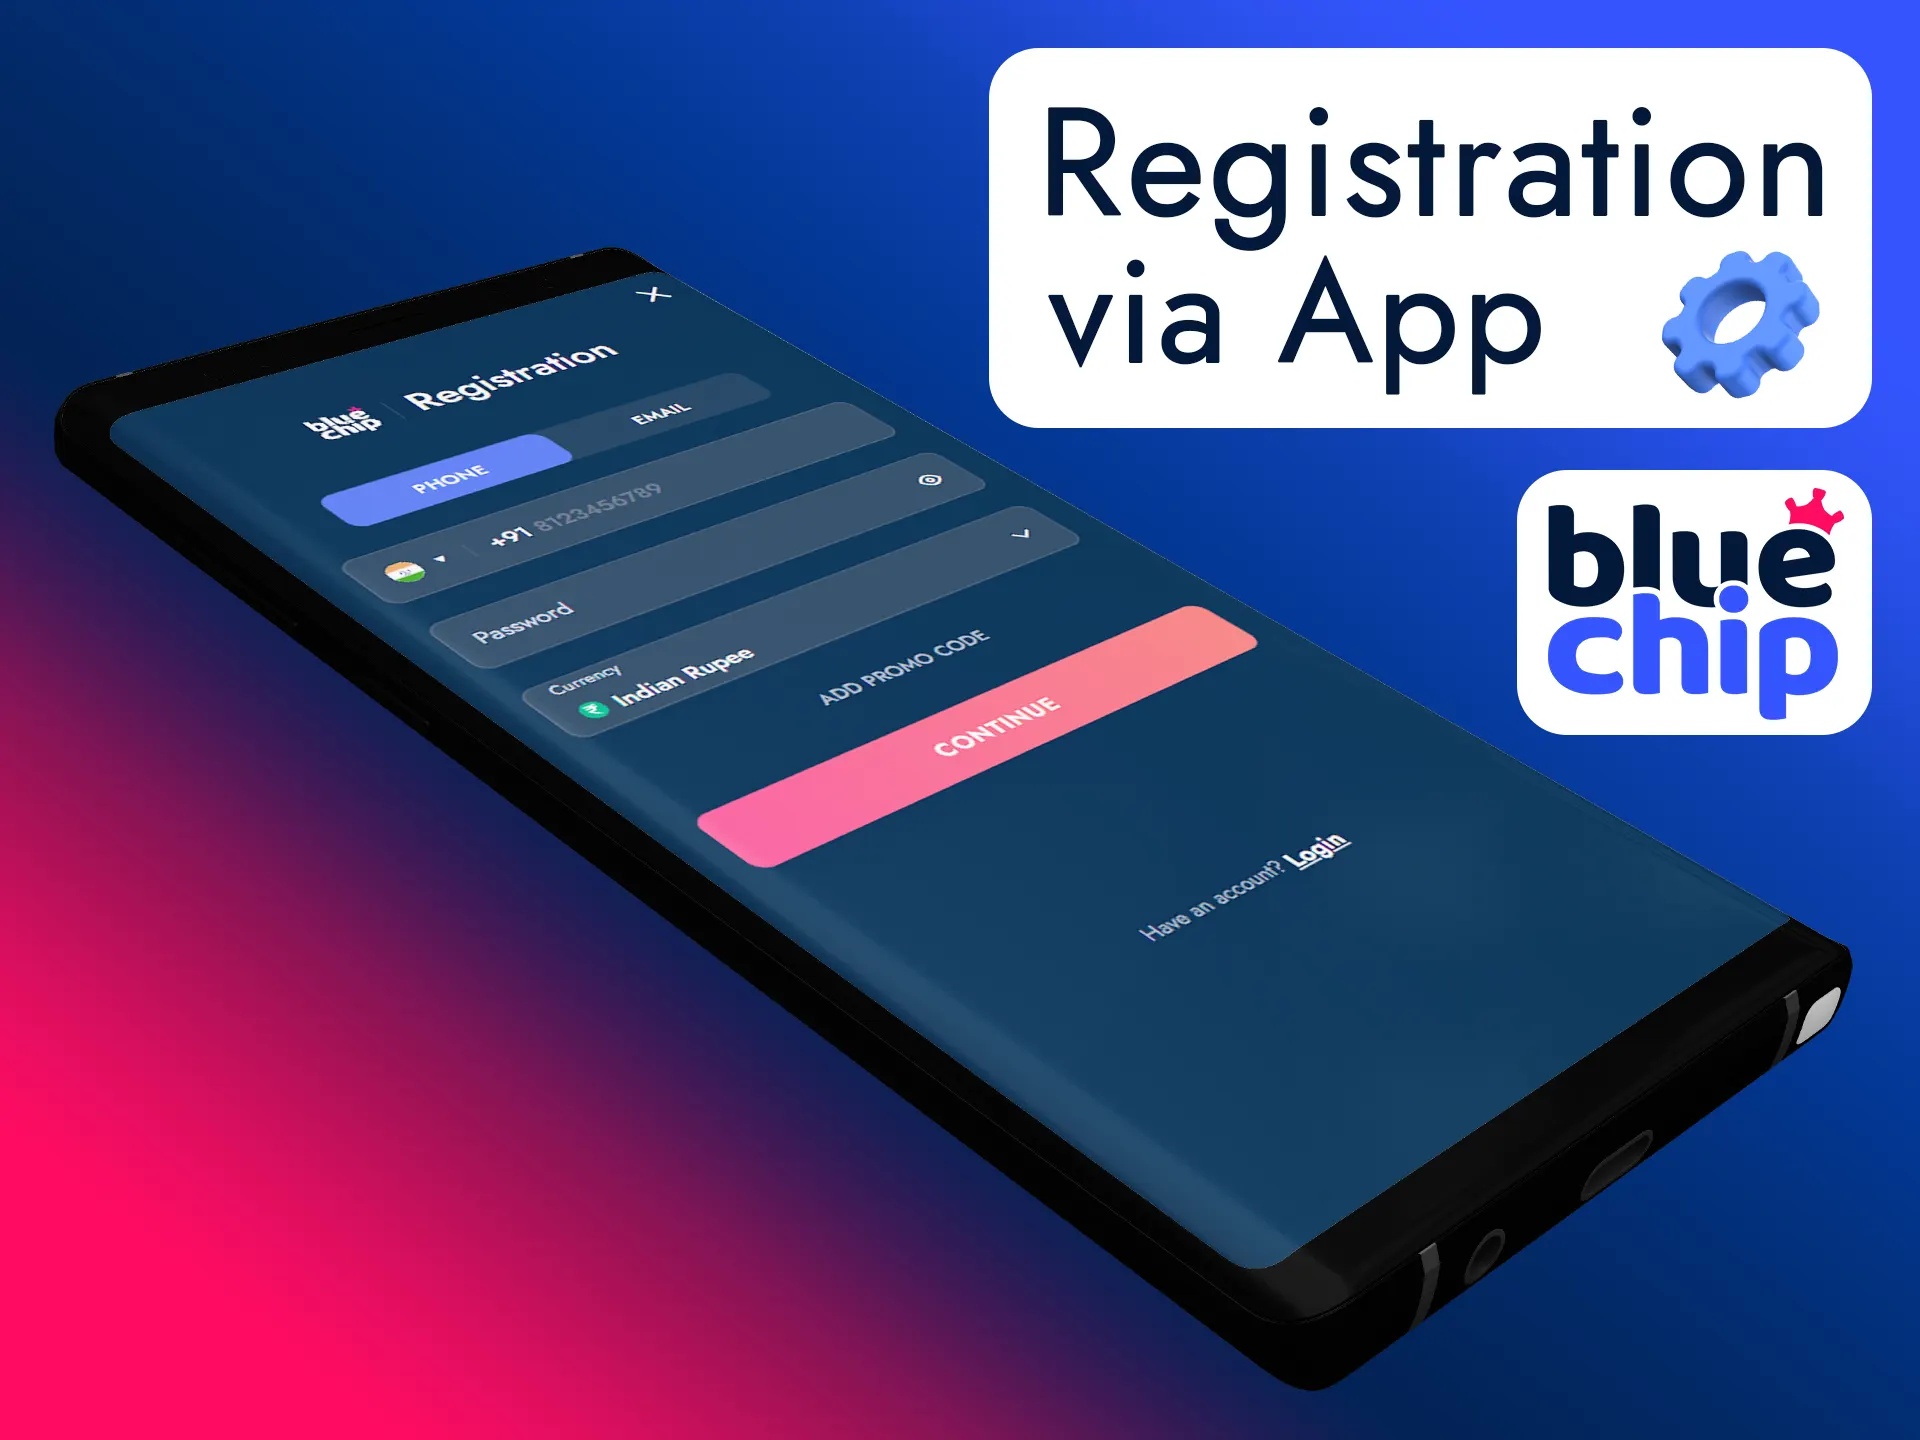 Registrate quicker by using Bluechip app.